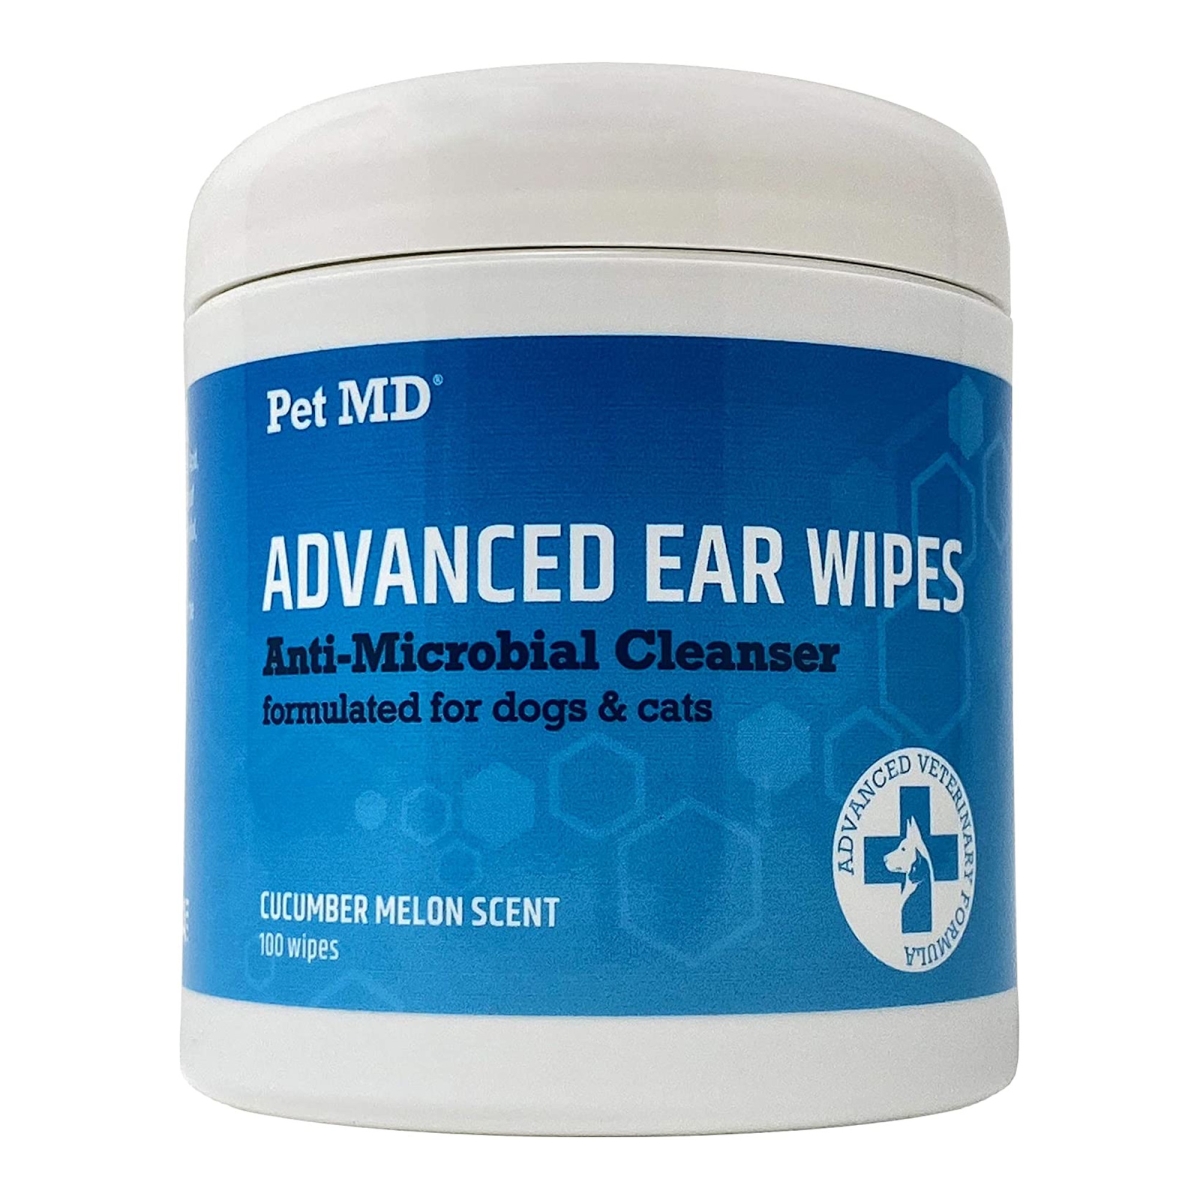 Pet MD Cat and Dog Ear Cleaner Wipes - Advanced Otic Veterinary Ear Cleaner Formula - Dog Ear Infection Treatment - 100 ct